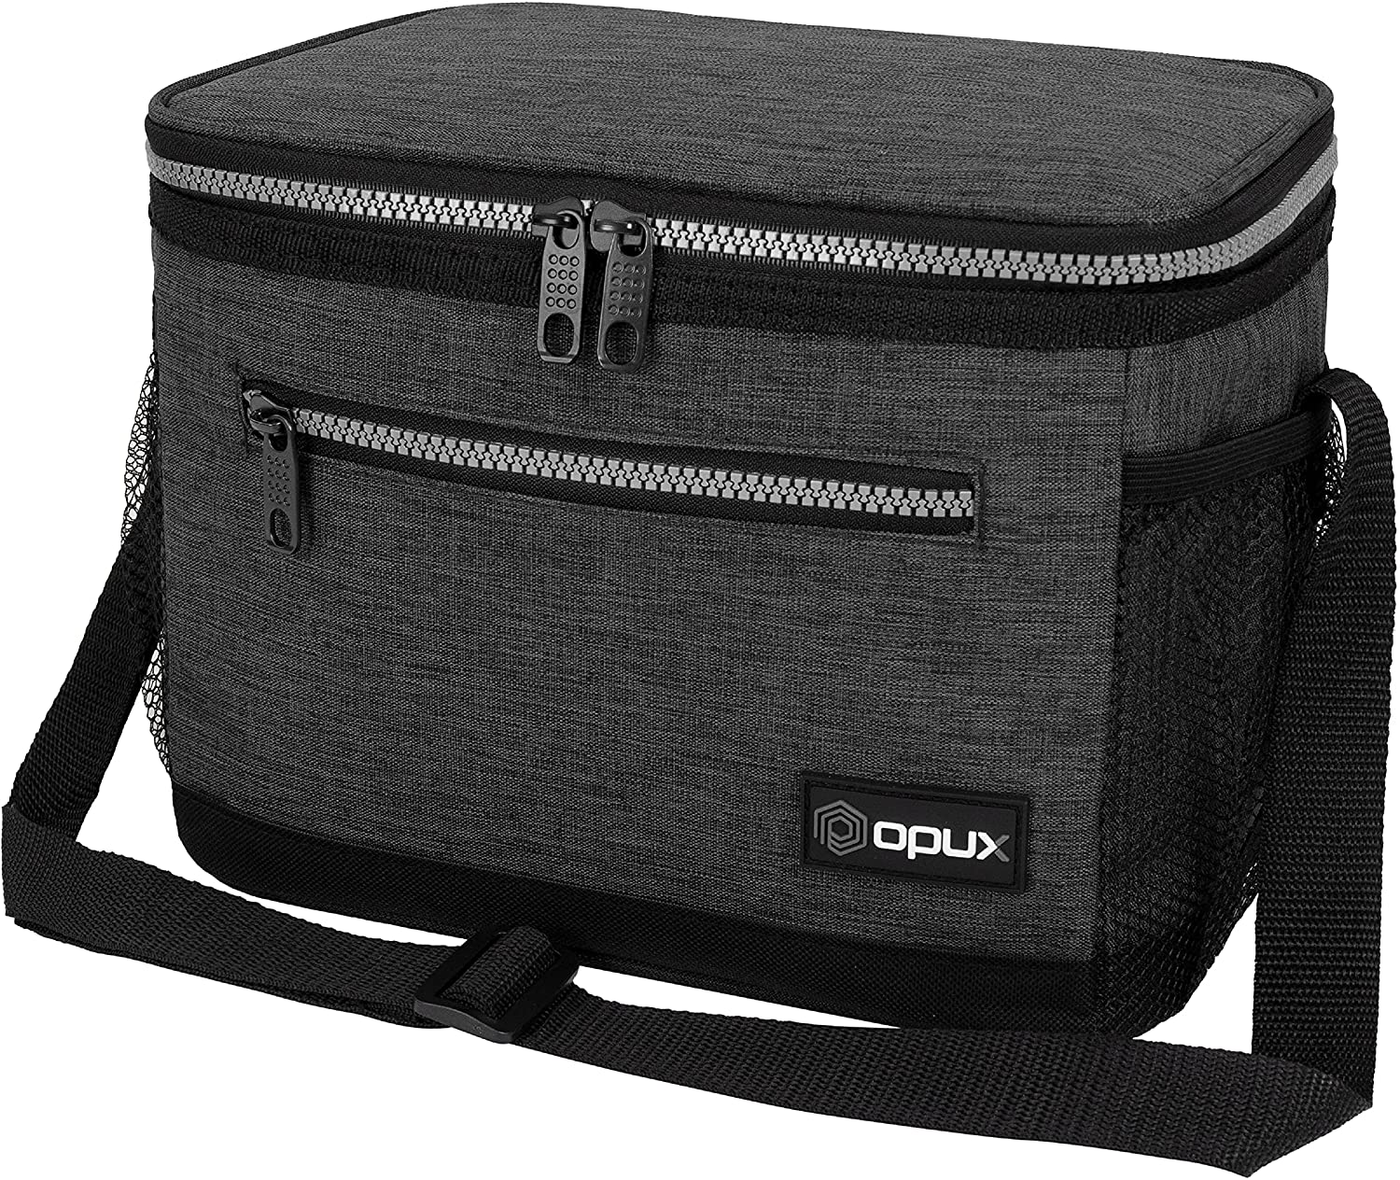 OPUX Insulated Lunch Box for Women Men, Leakproof Thermal Lunch Bag for Work, Reusable Lunch Cooler Tote, Soft School Lunch Pail for Kids with Shoulder Strap, Pockets, 14 Cans, 8L, Floral Black